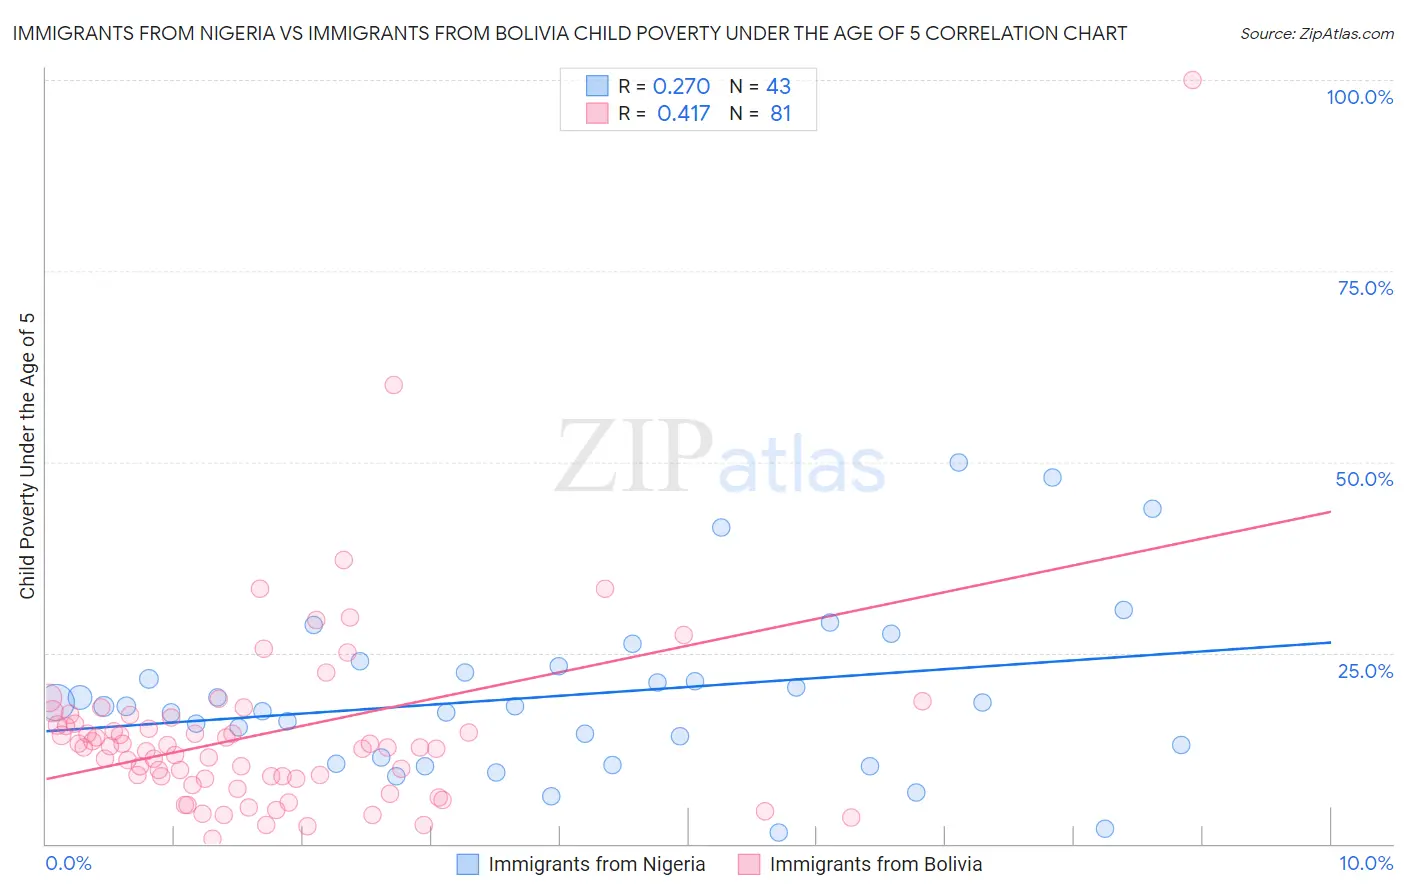 Immigrants from Nigeria vs Immigrants from Bolivia Child Poverty Under the Age of 5